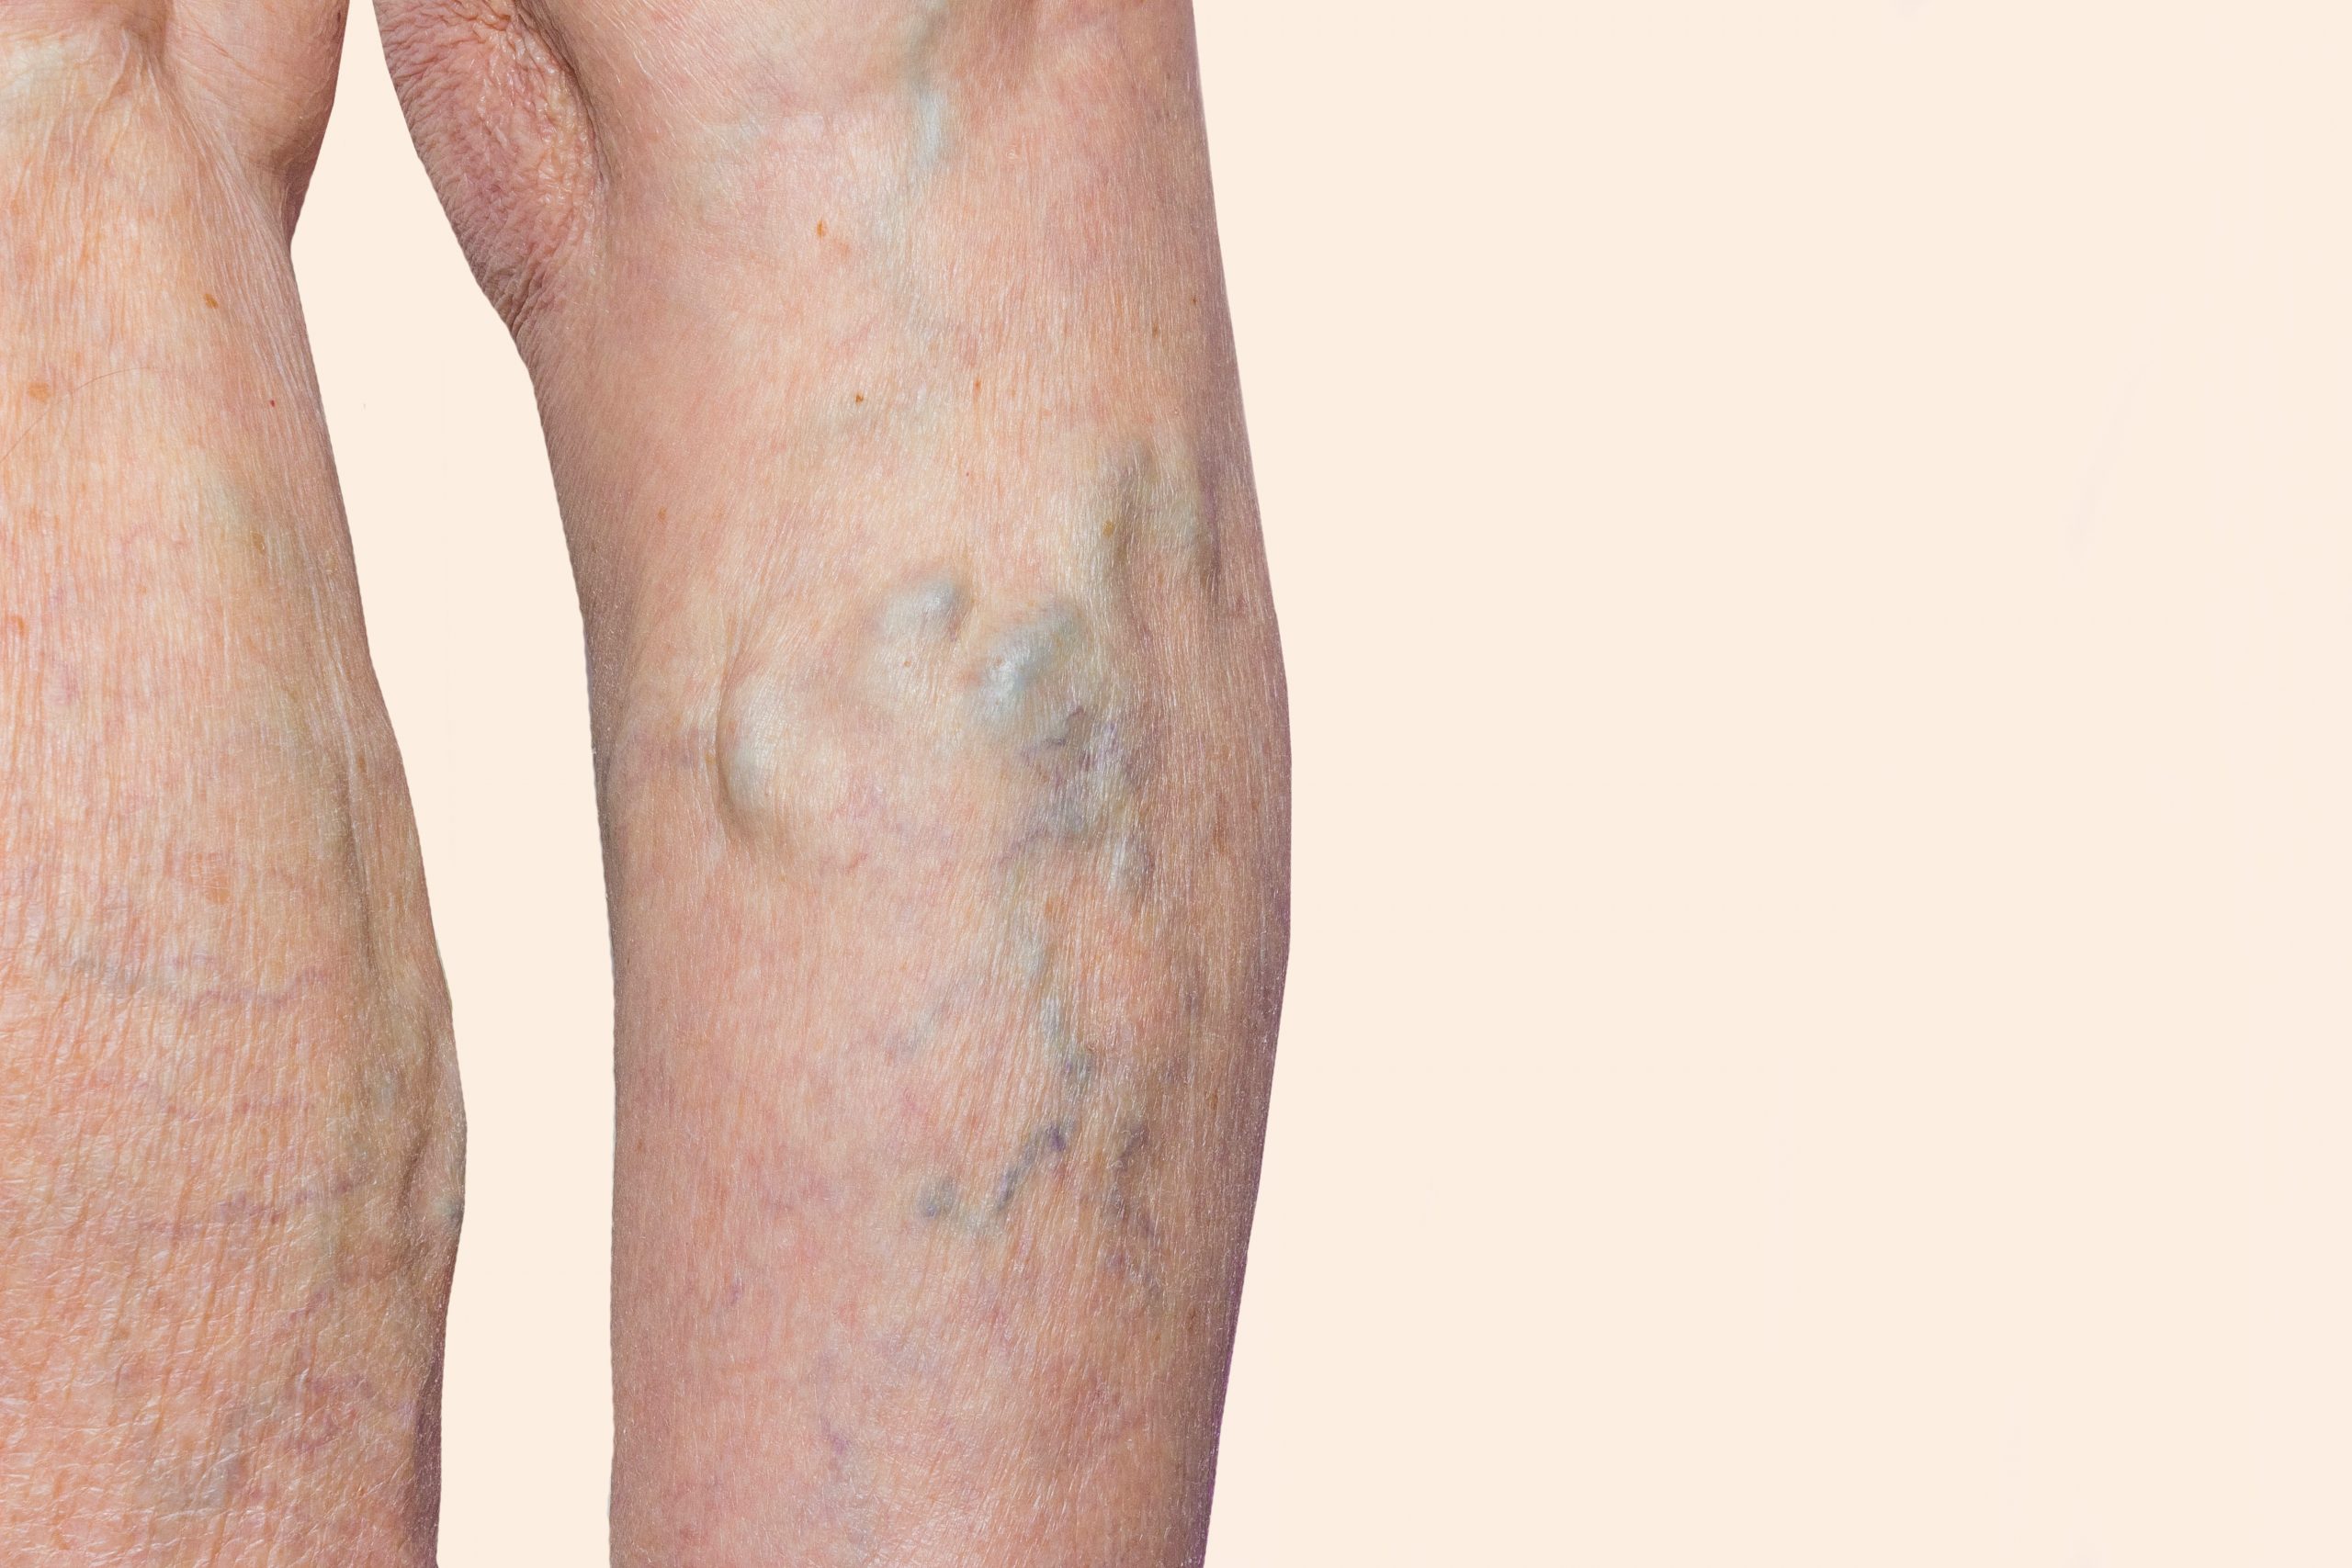 Copy-of-Varicose-Veins-on-Leg-shutterstock_1035063316-scaled (1)